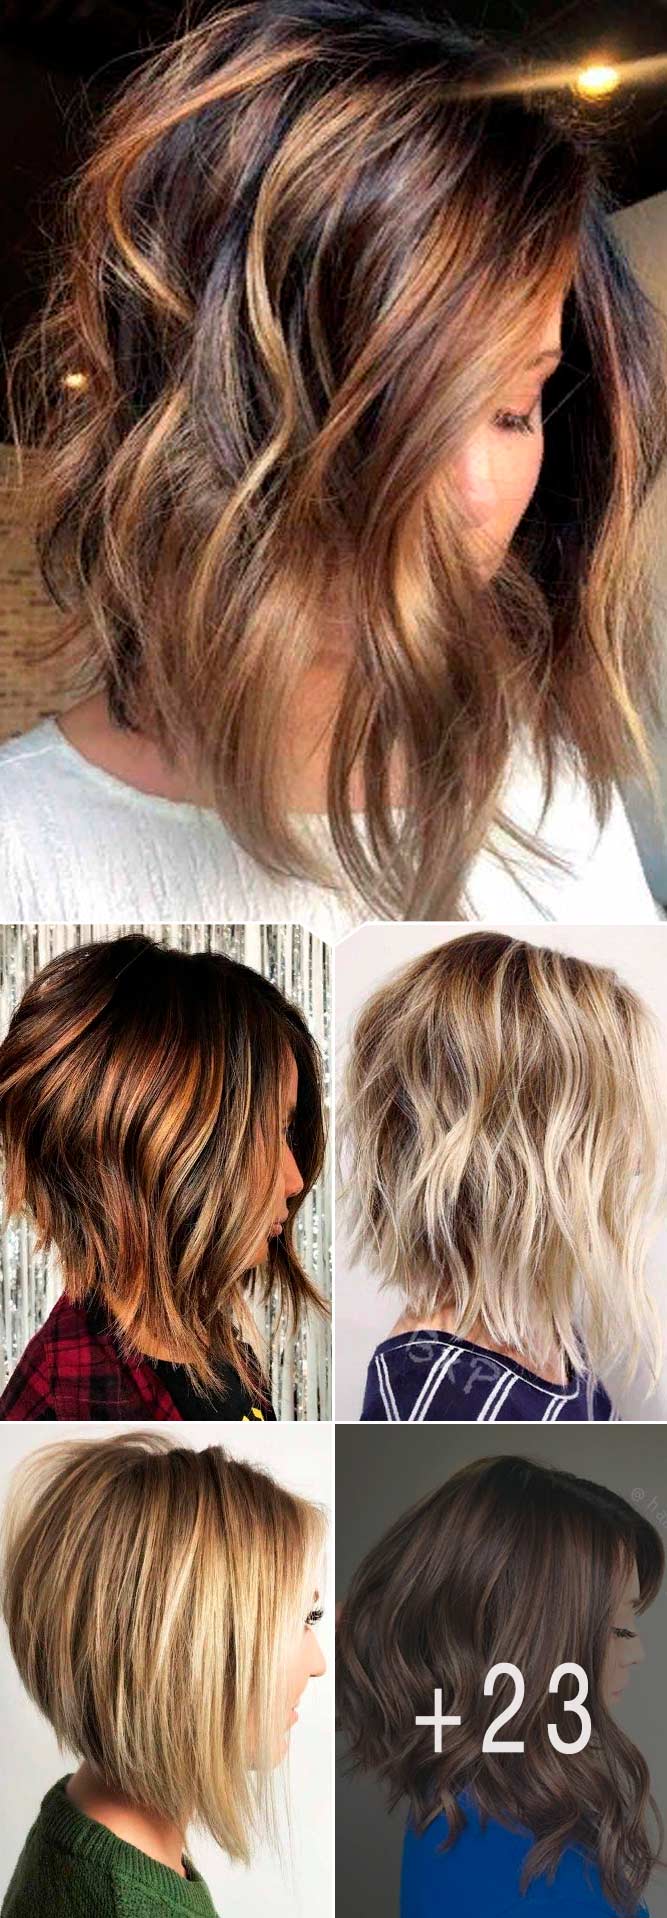 Ideas Of Inverted Bob Hairstyles To Refresh Your Style